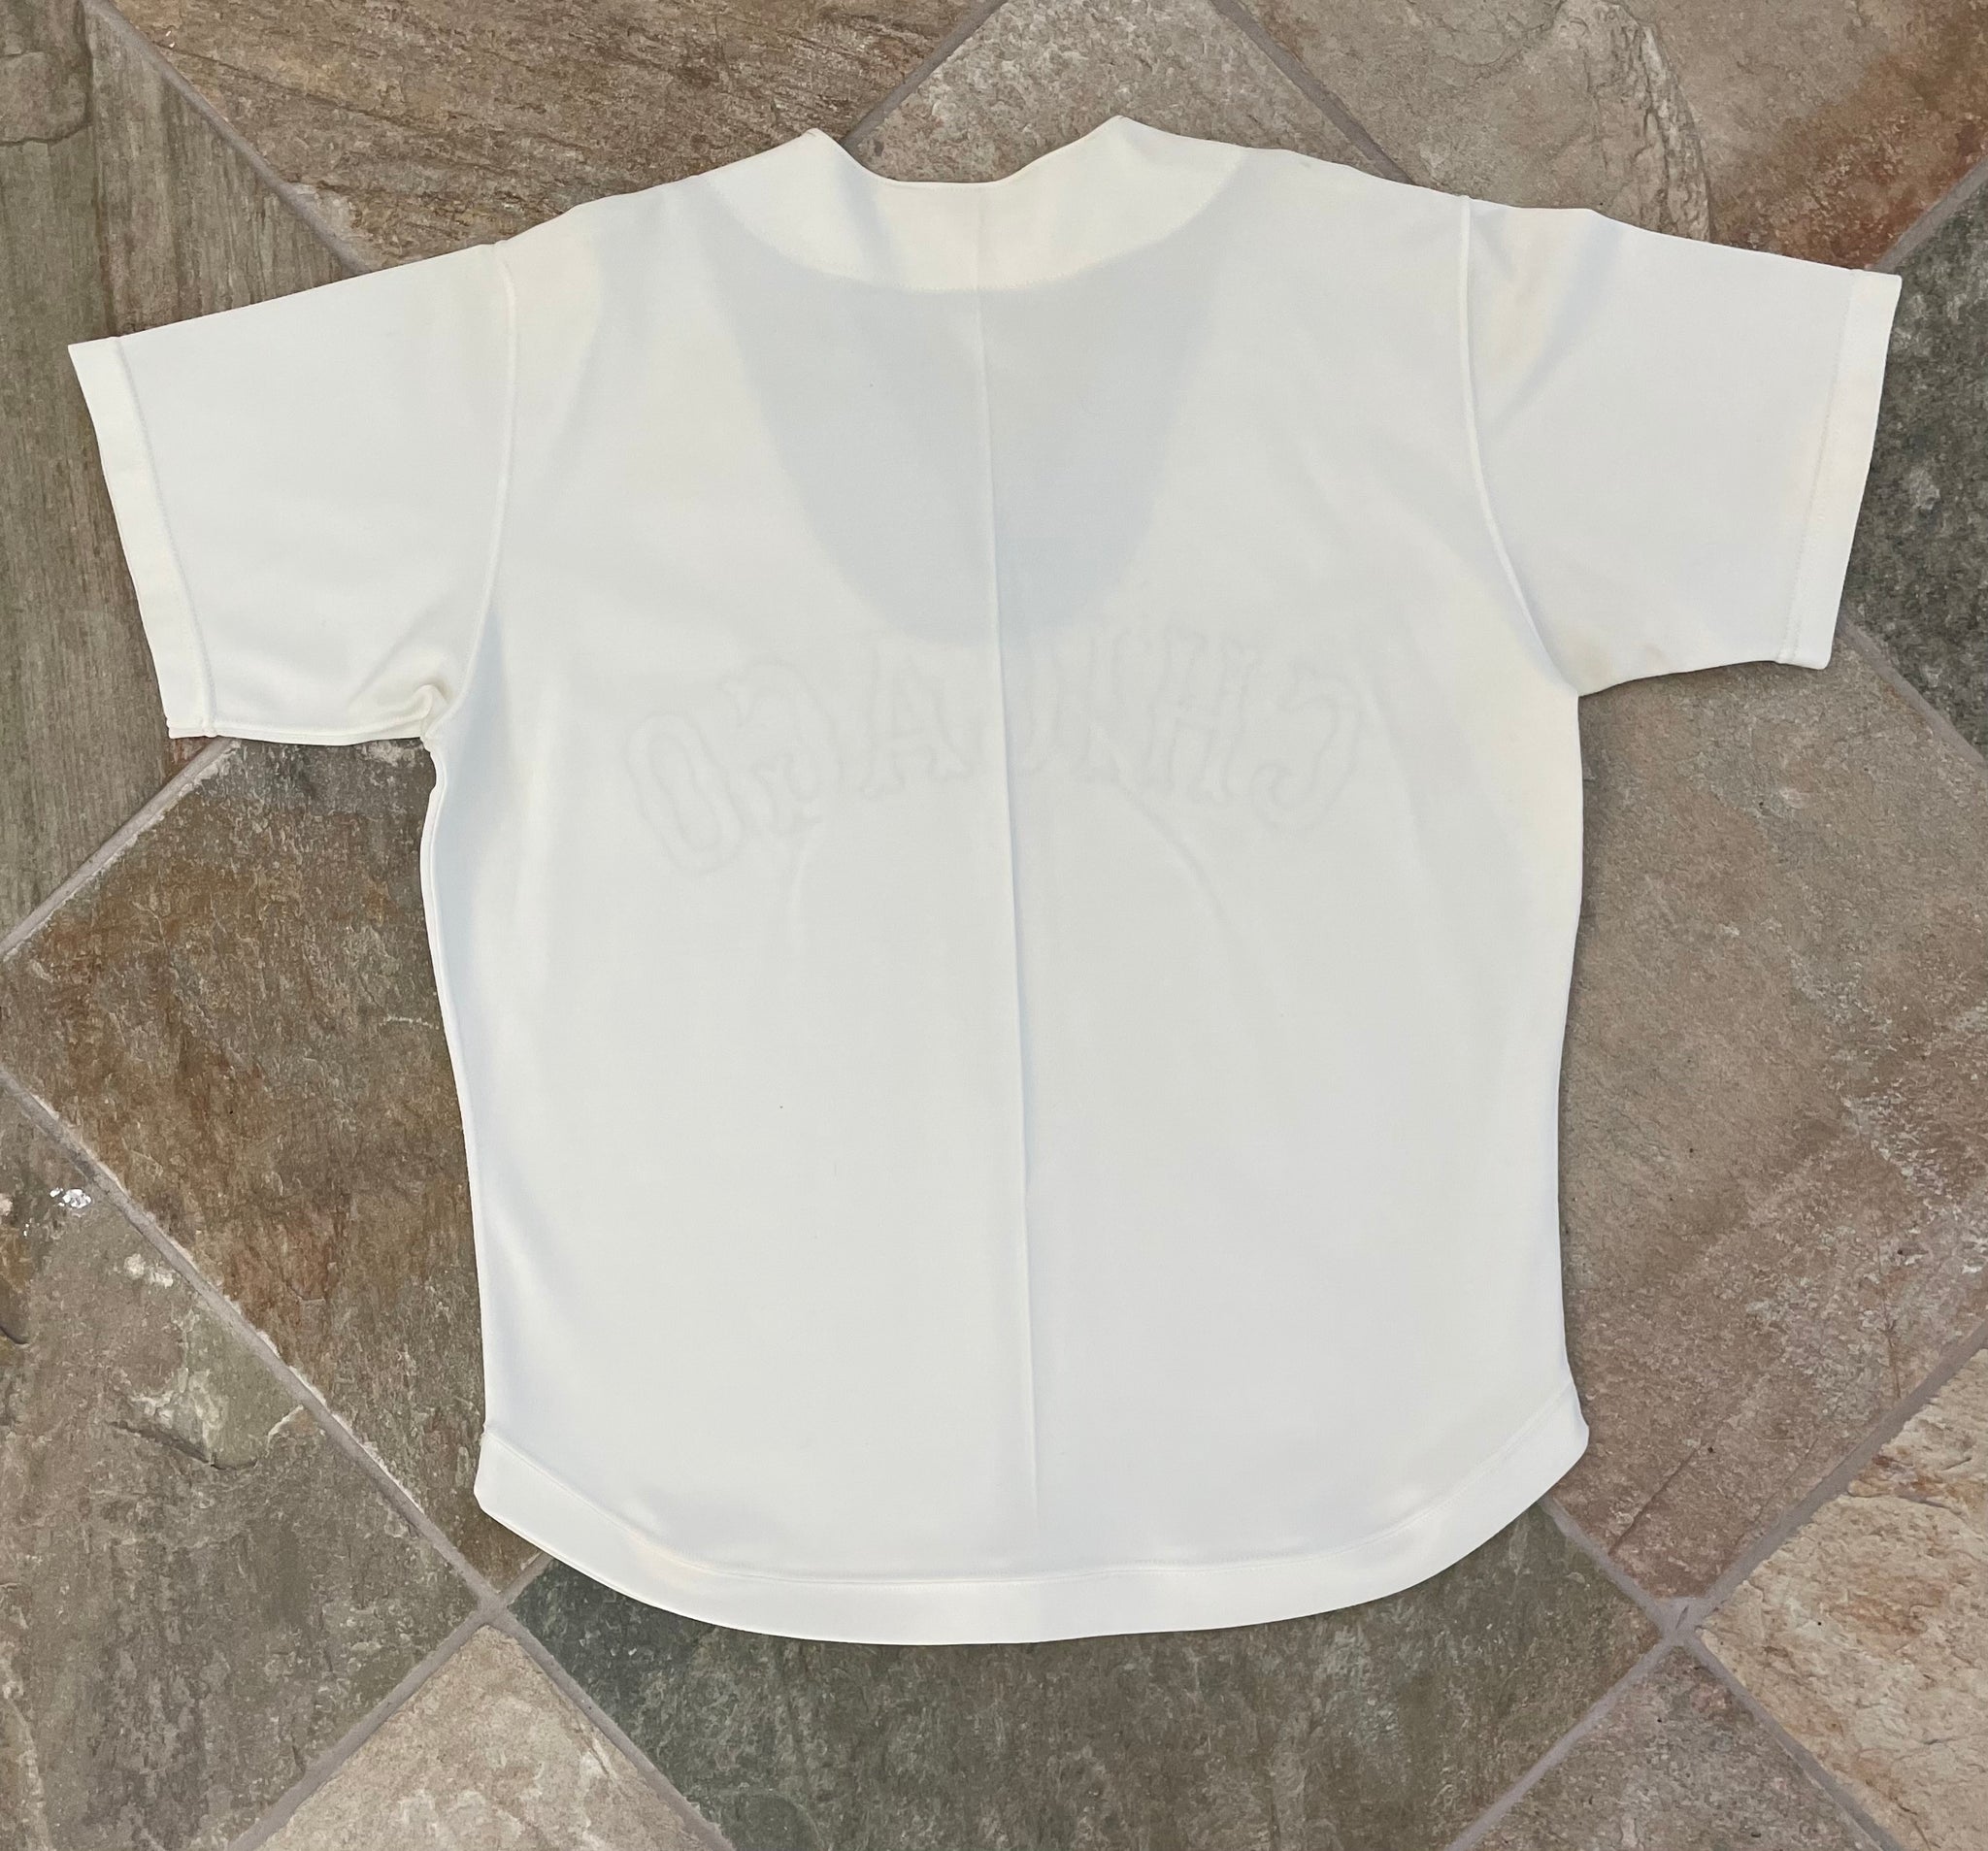 1976 Chicago White Sox Prototype Jersey. Baseball Collectibles